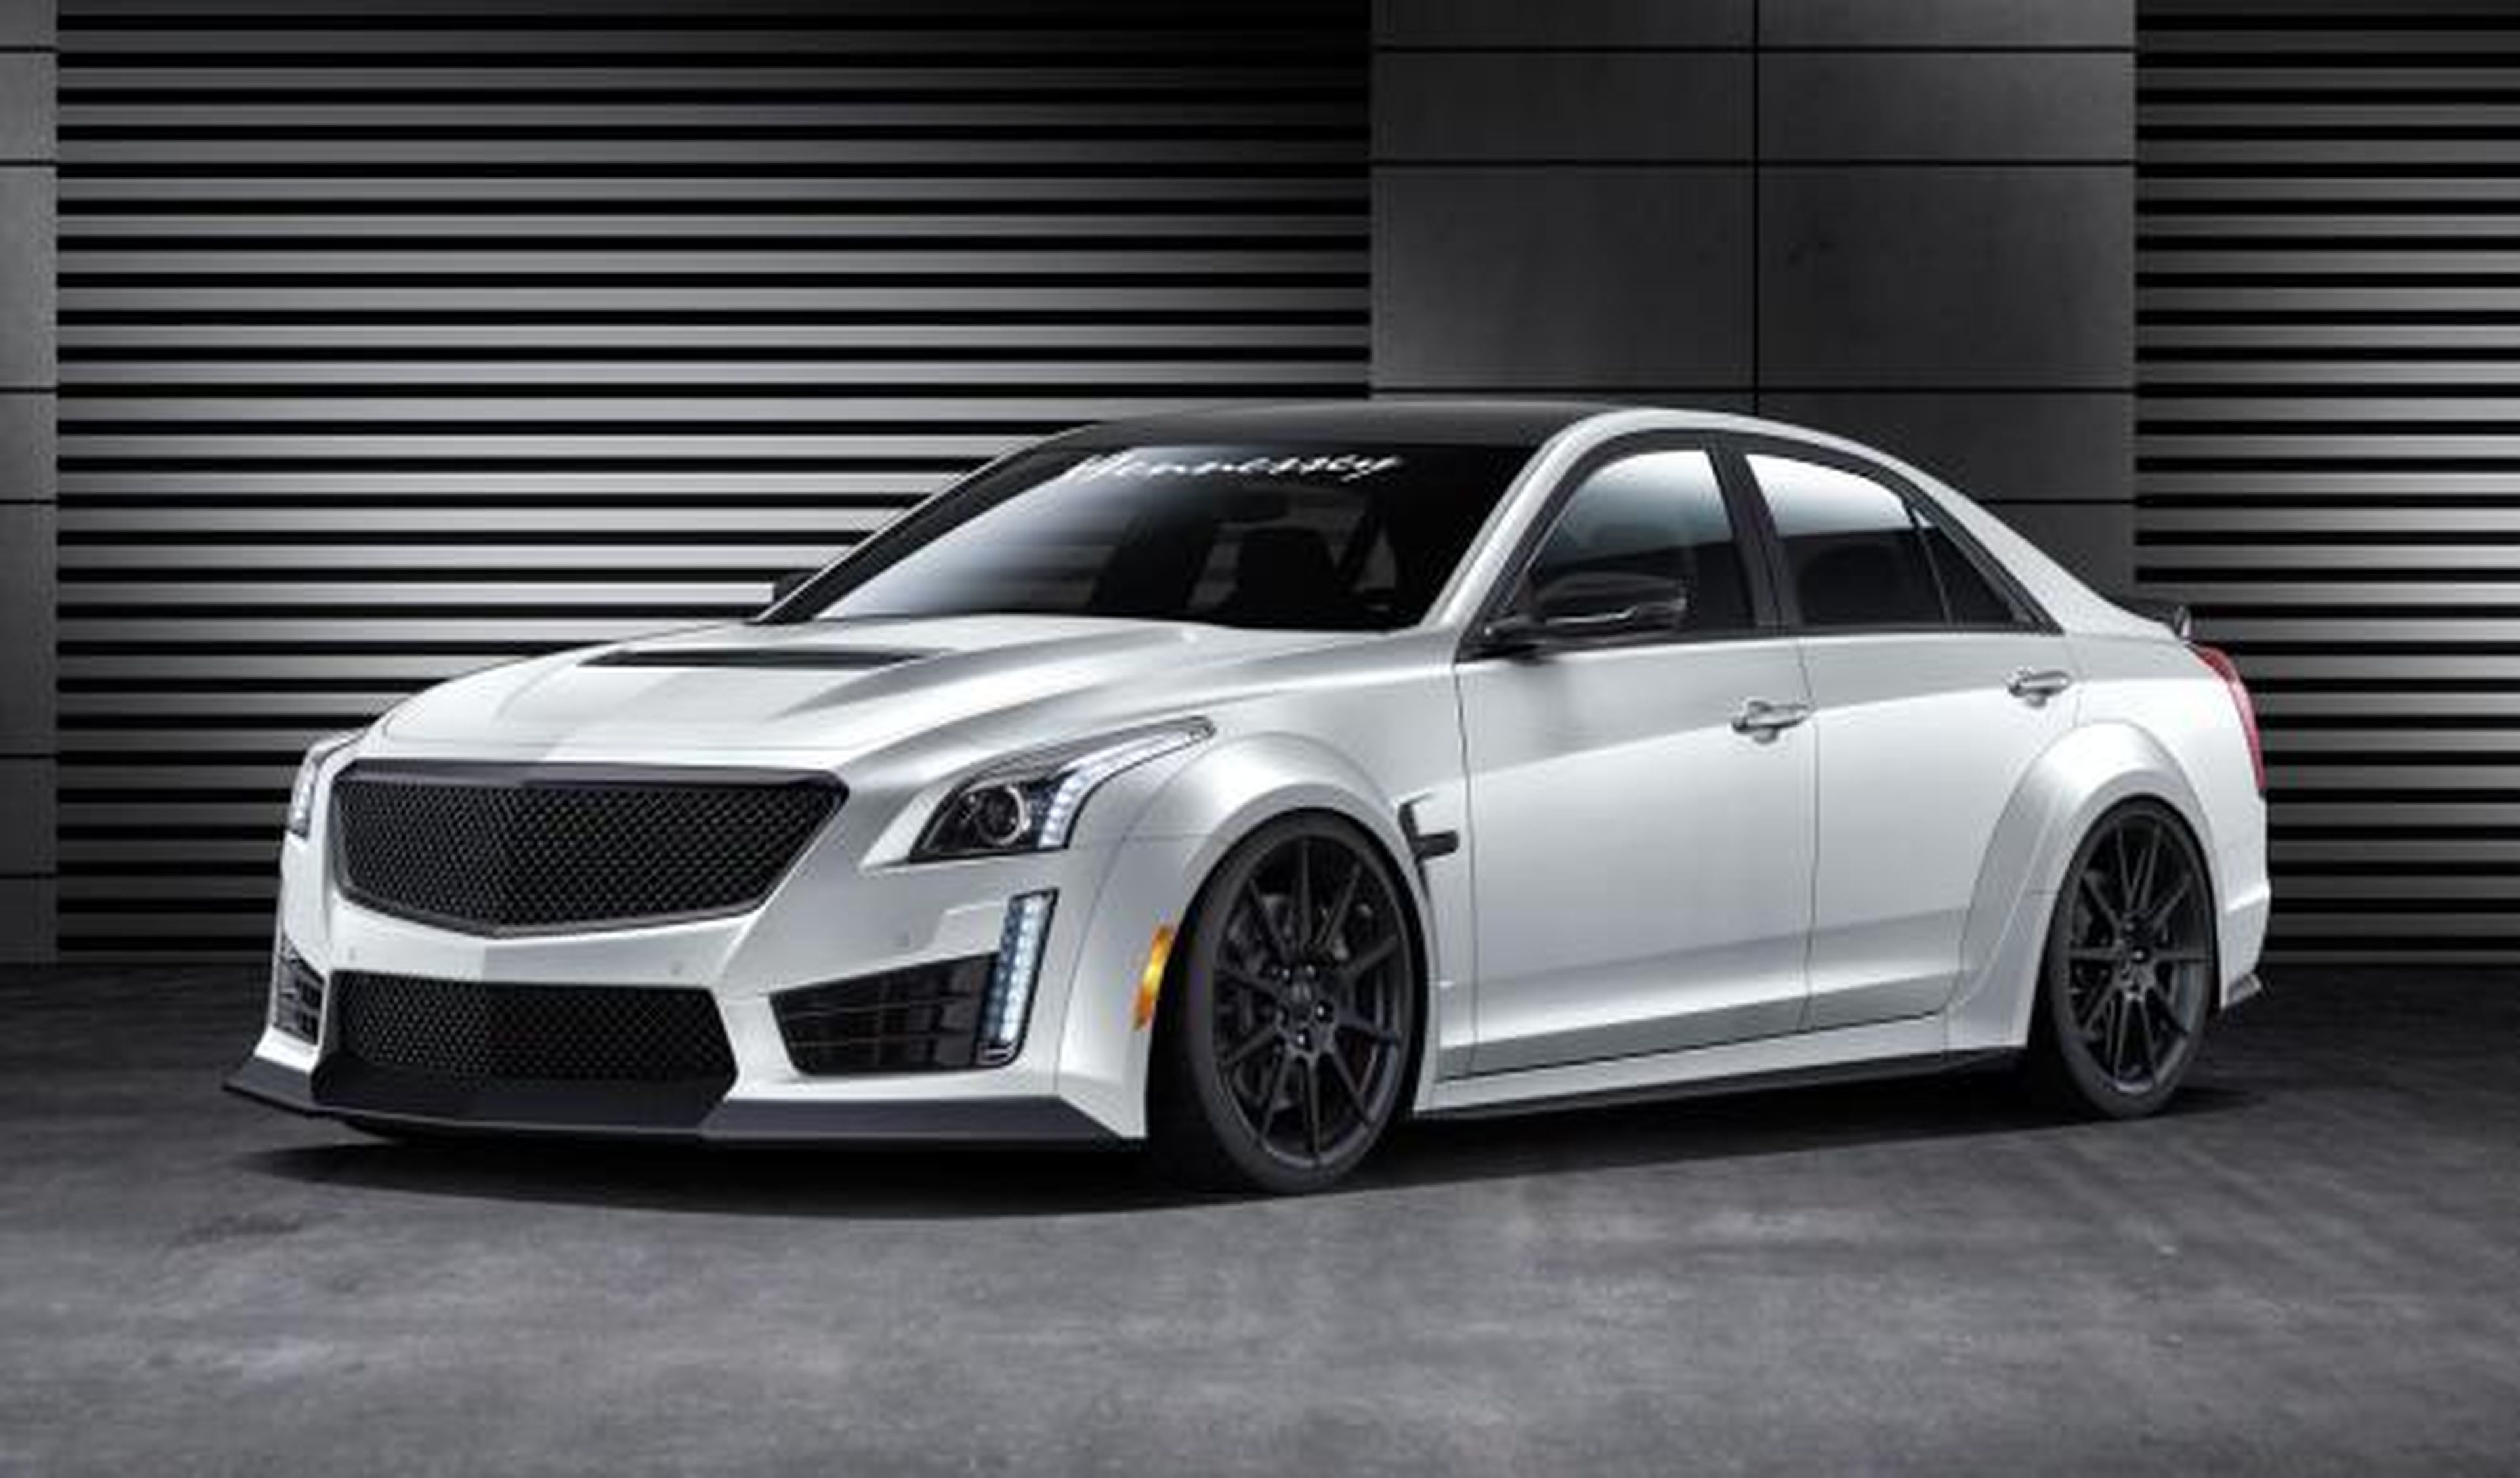 Cadillac CTS-V HPE1000 biturbo: ¡Hennessey lo pone a punto!